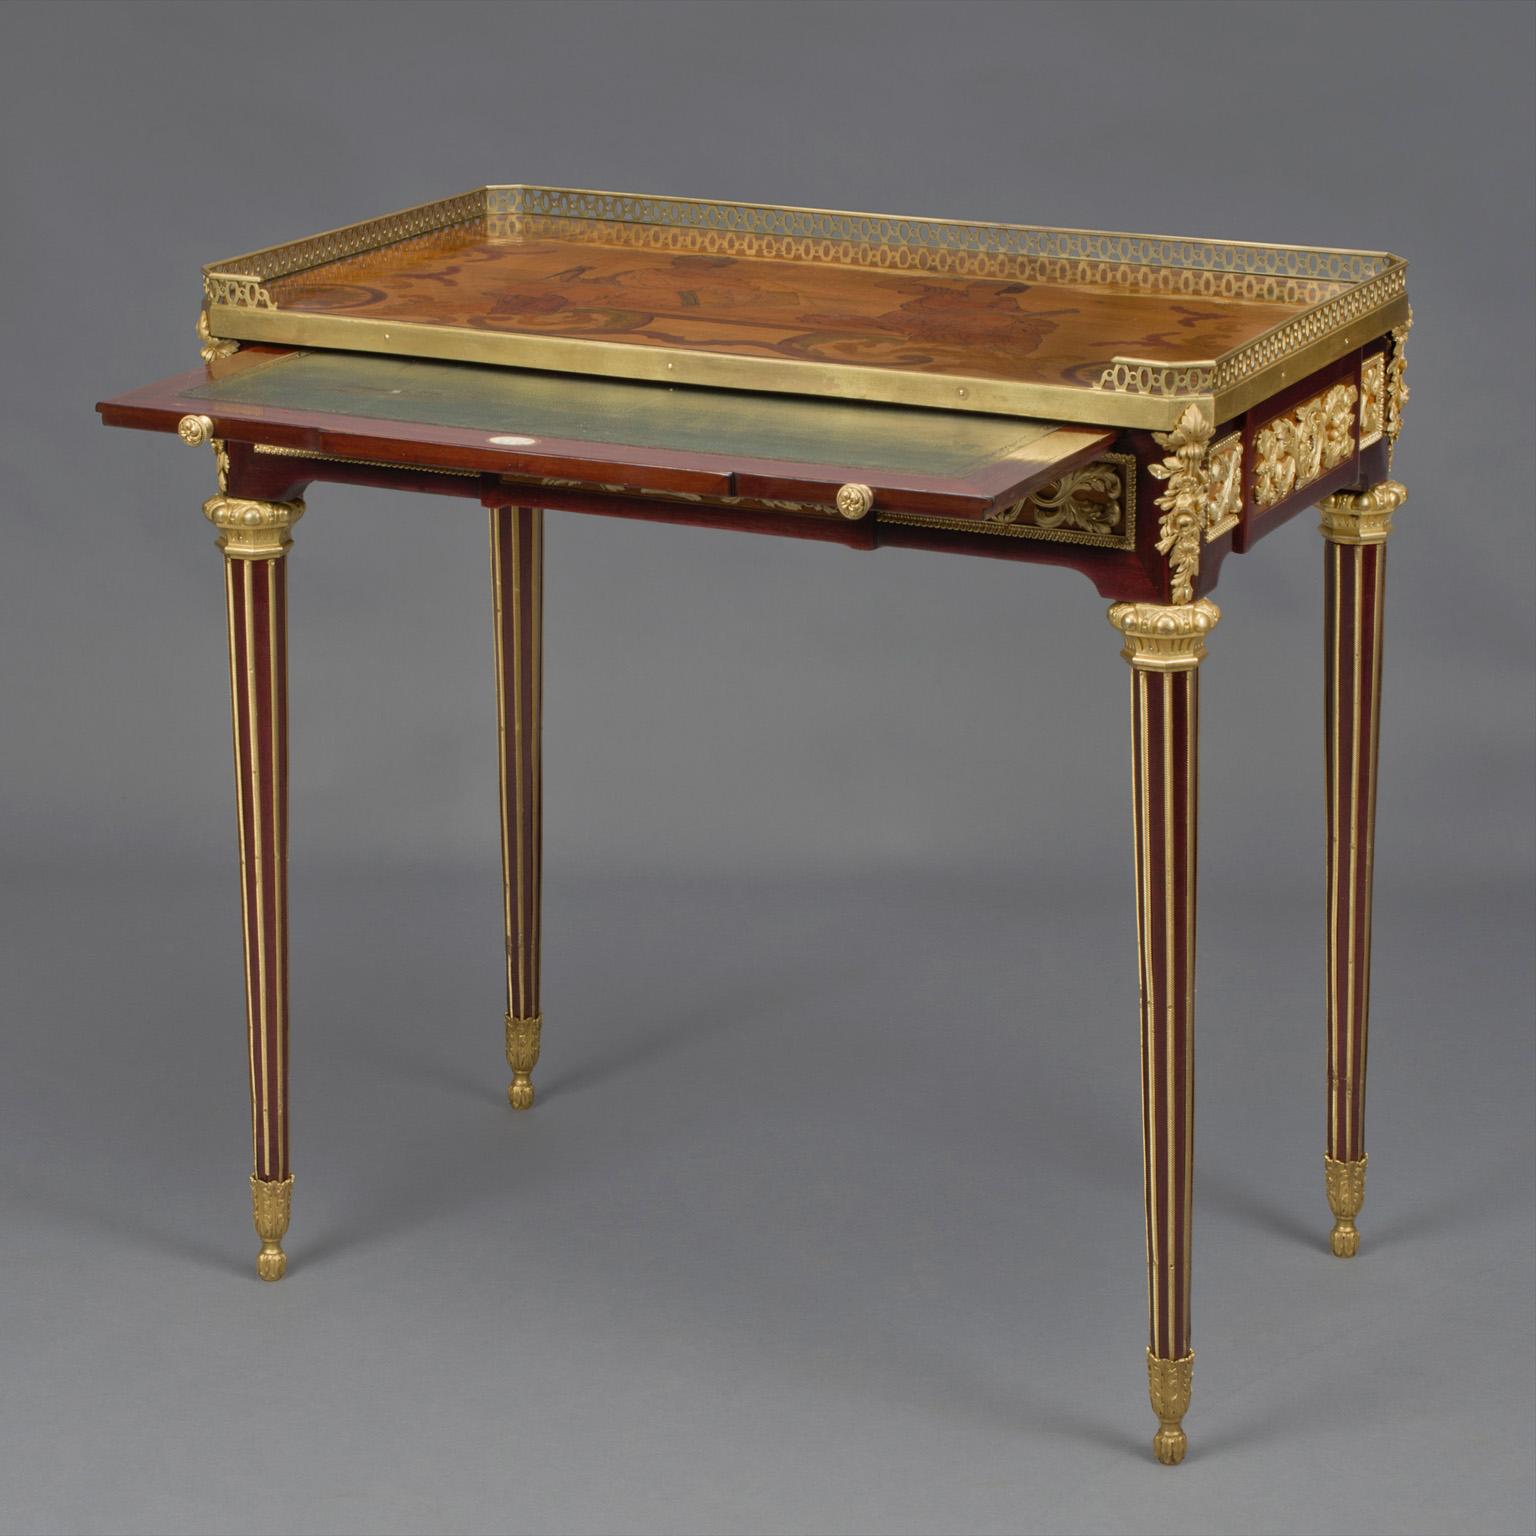 A Louis XVI style gilt bronze mounted mahogany and Marquetry inlaid writing table after the model by Jean-Henri Riesener.

This finely inlaid writing table is based on the famous 'Table des Muses' by the 18th century Royal ébéniste Jean-Henri